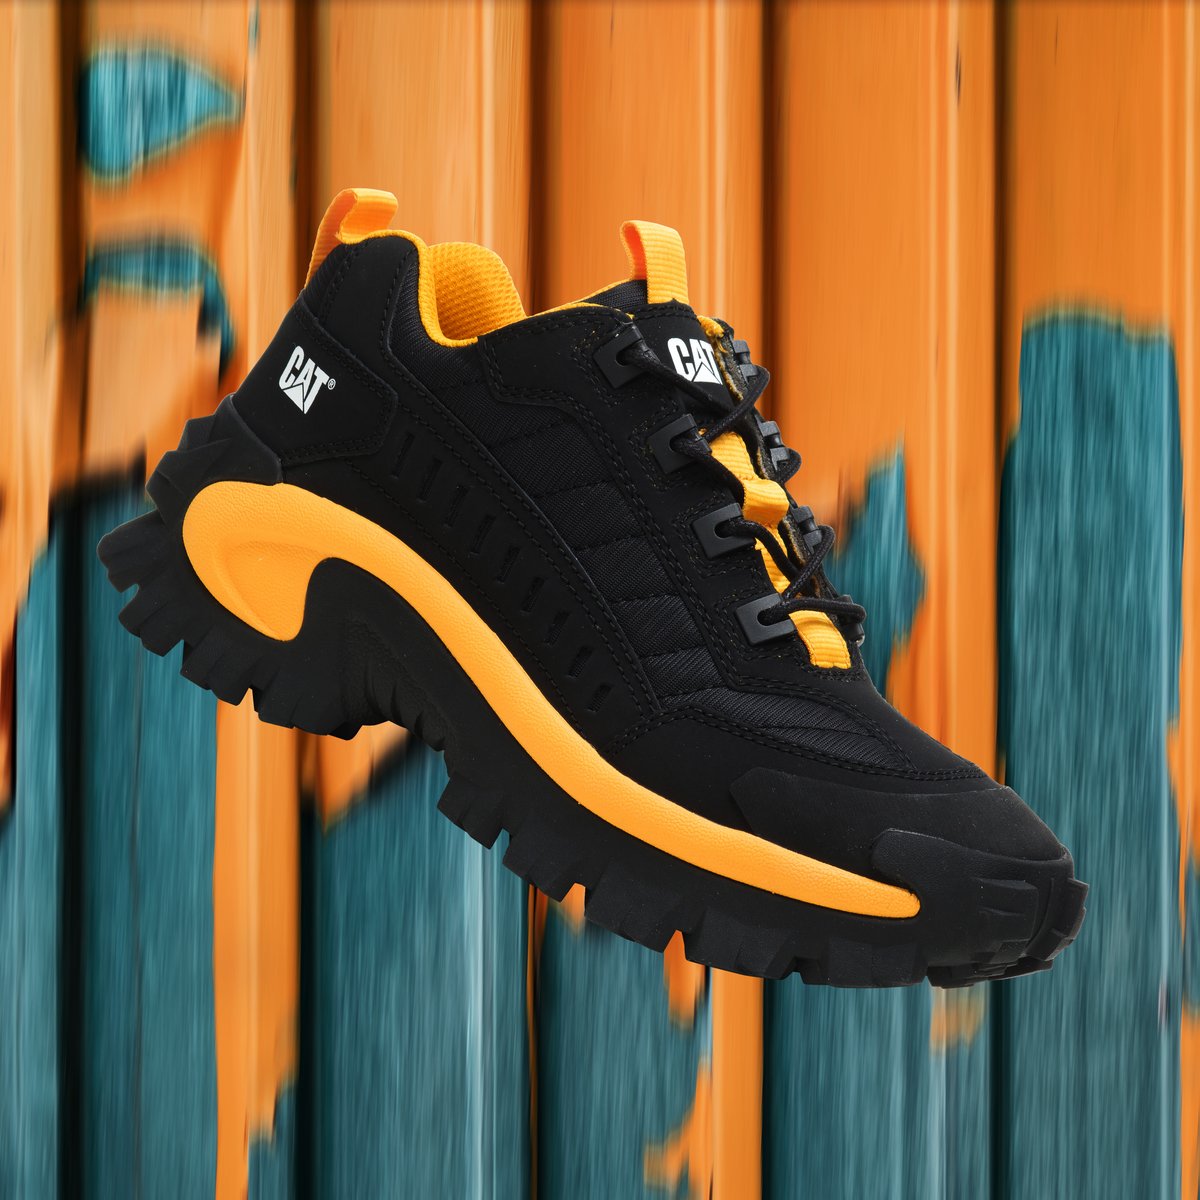 These bold and rugged shoes are built to withstand the toughest challenges while making a statement with their distinctive design. Shop the Intruder in Black/Cat Yellow online today! bit.ly/3VWlkHD #catfootwearsa #footwear #shoes #fashion #fashionshoes #streetstyle